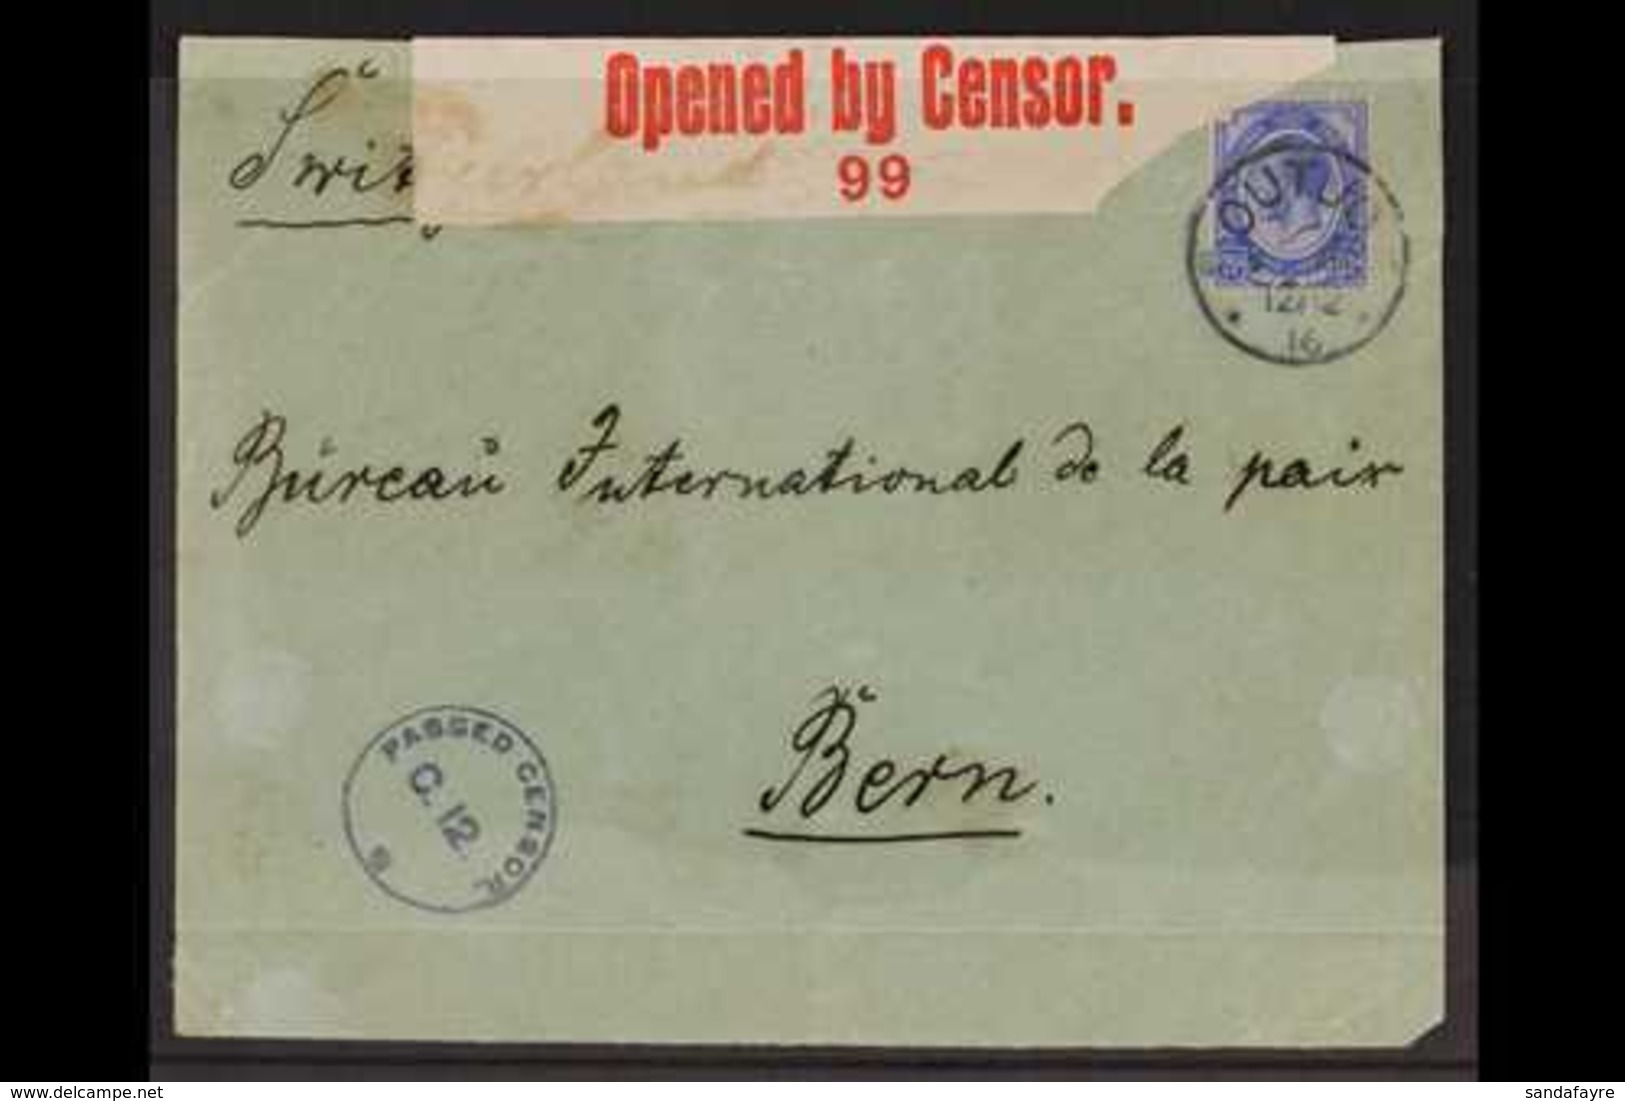 1916 (12 Feb) Env To Switzerland Bearing 2½d Union Stamp Tied By "OUTJO" Cds Cancel, Putzel Type B4 Oc, Circular Censor  - Zuidwest-Afrika (1923-1990)